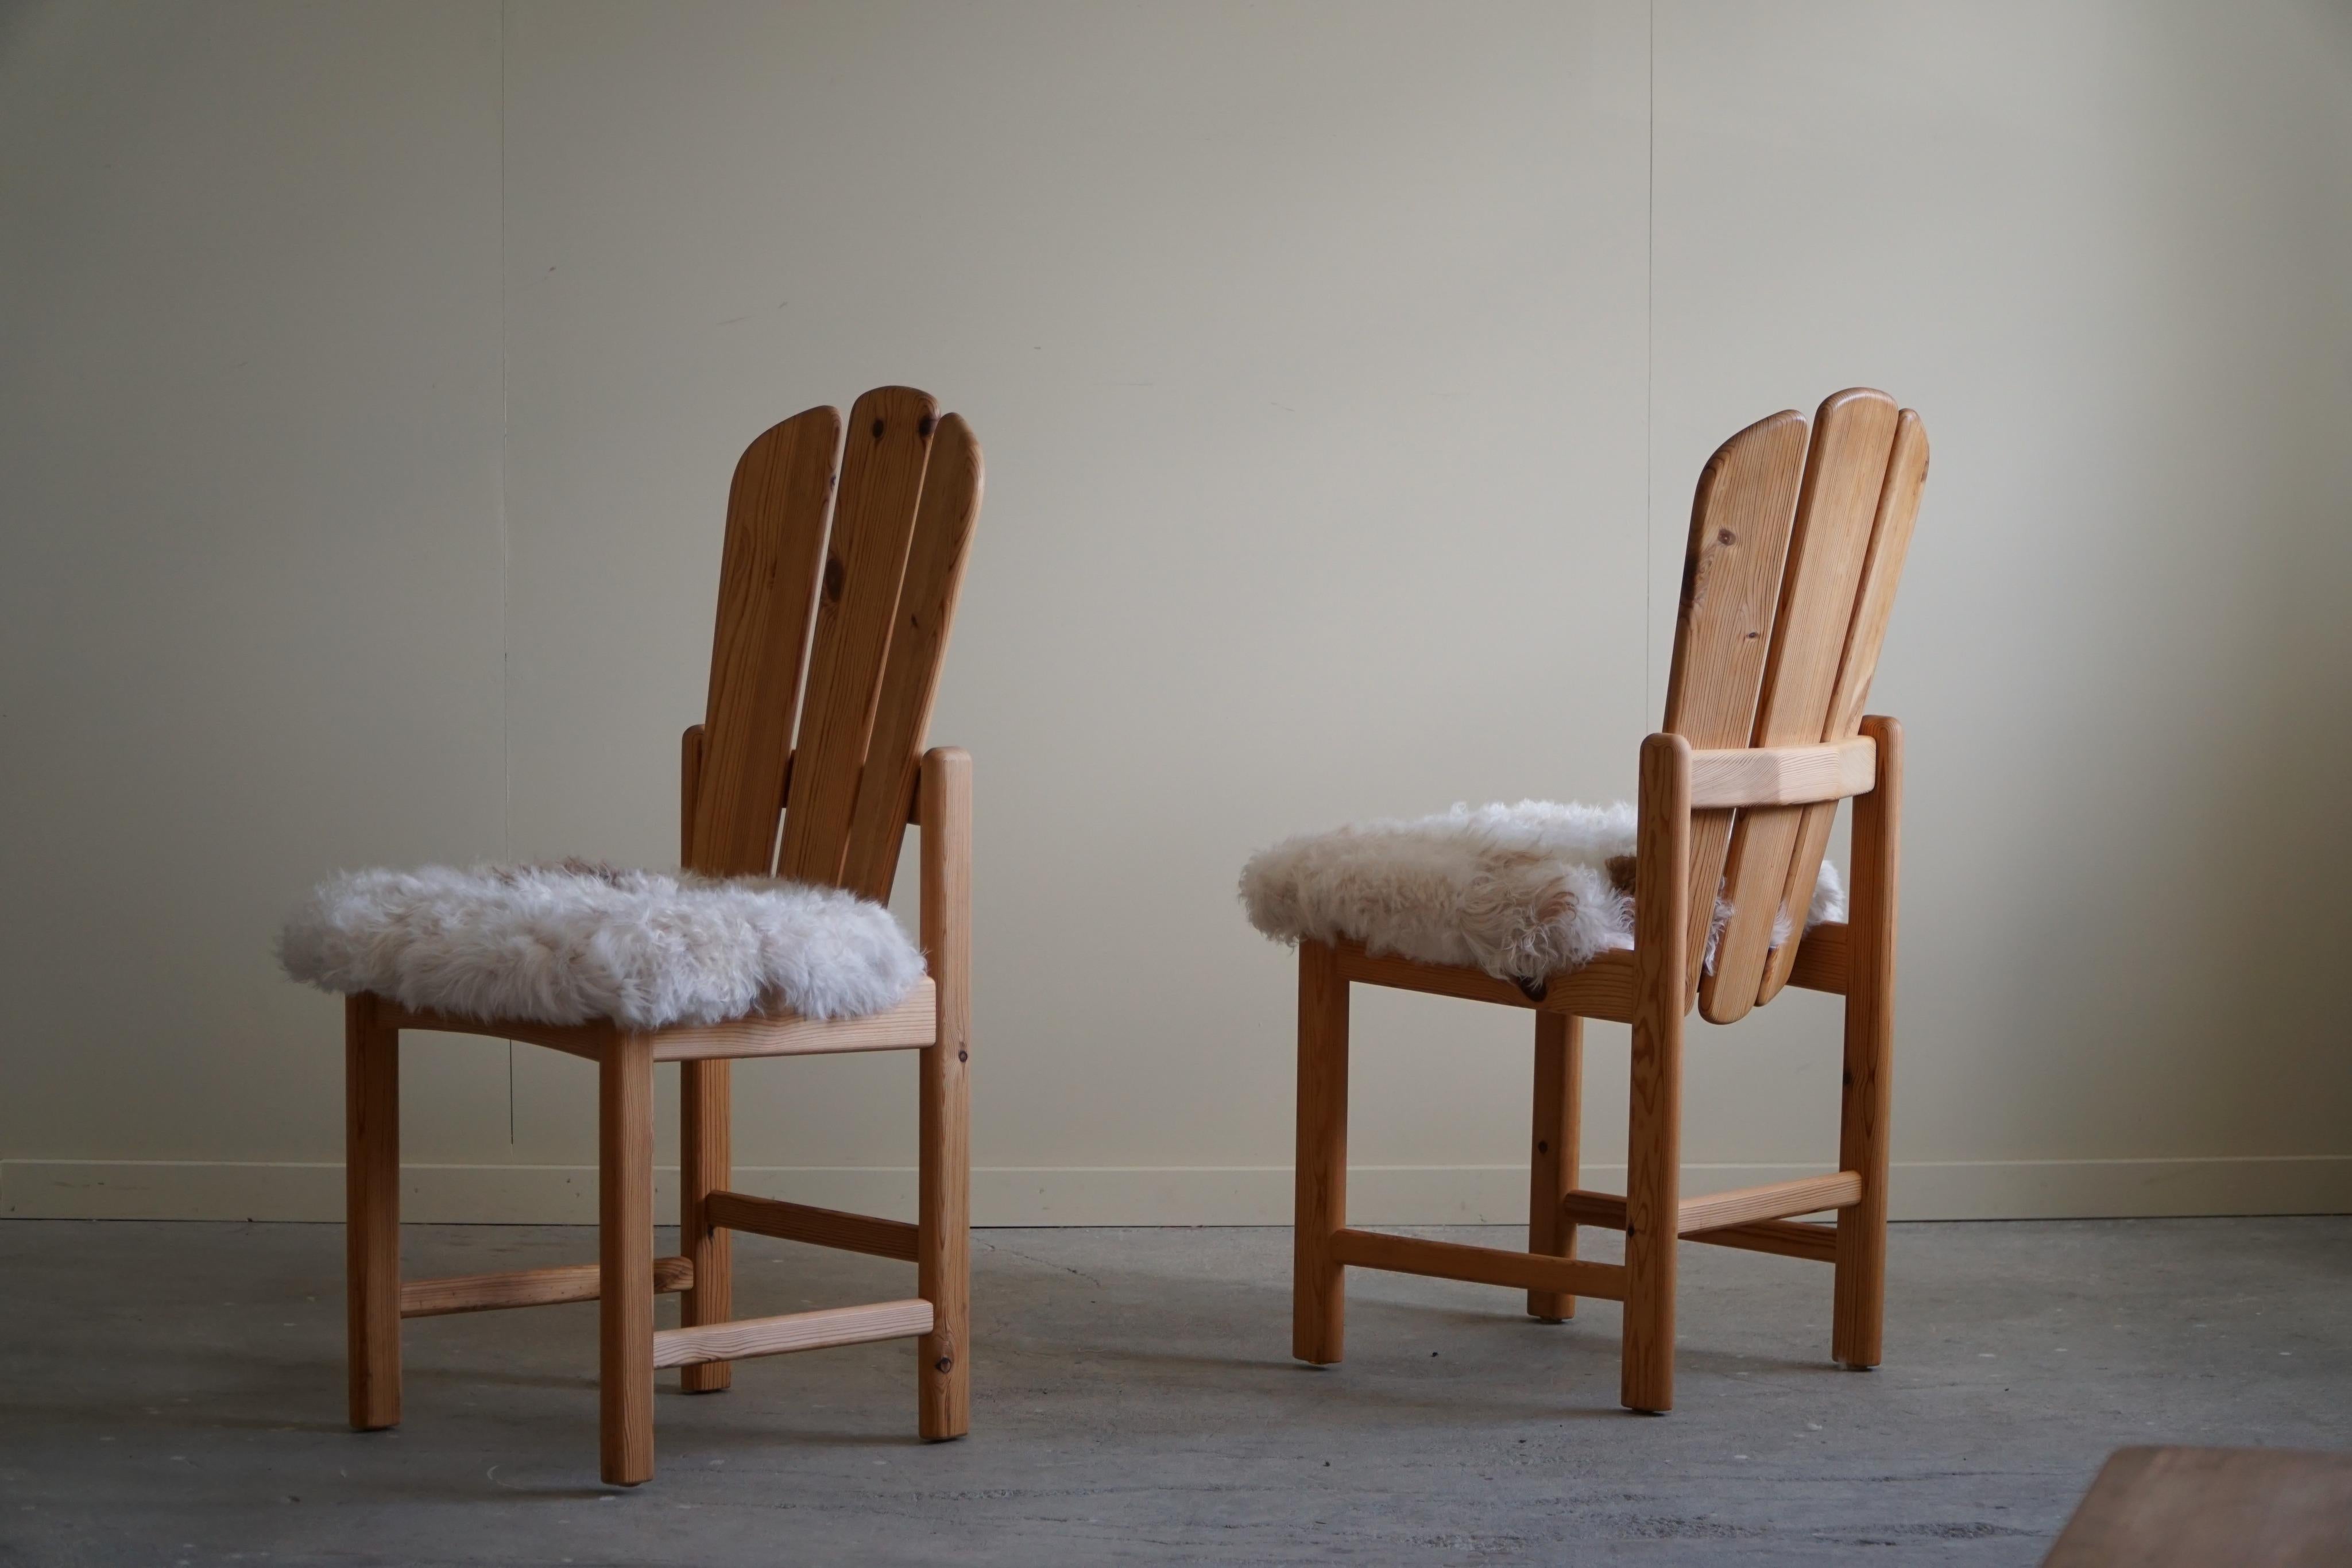 Pair of 2 Sculptural Danish Modern Brutalist Dining Chairs in Solid Pine, 1970s For Sale 2